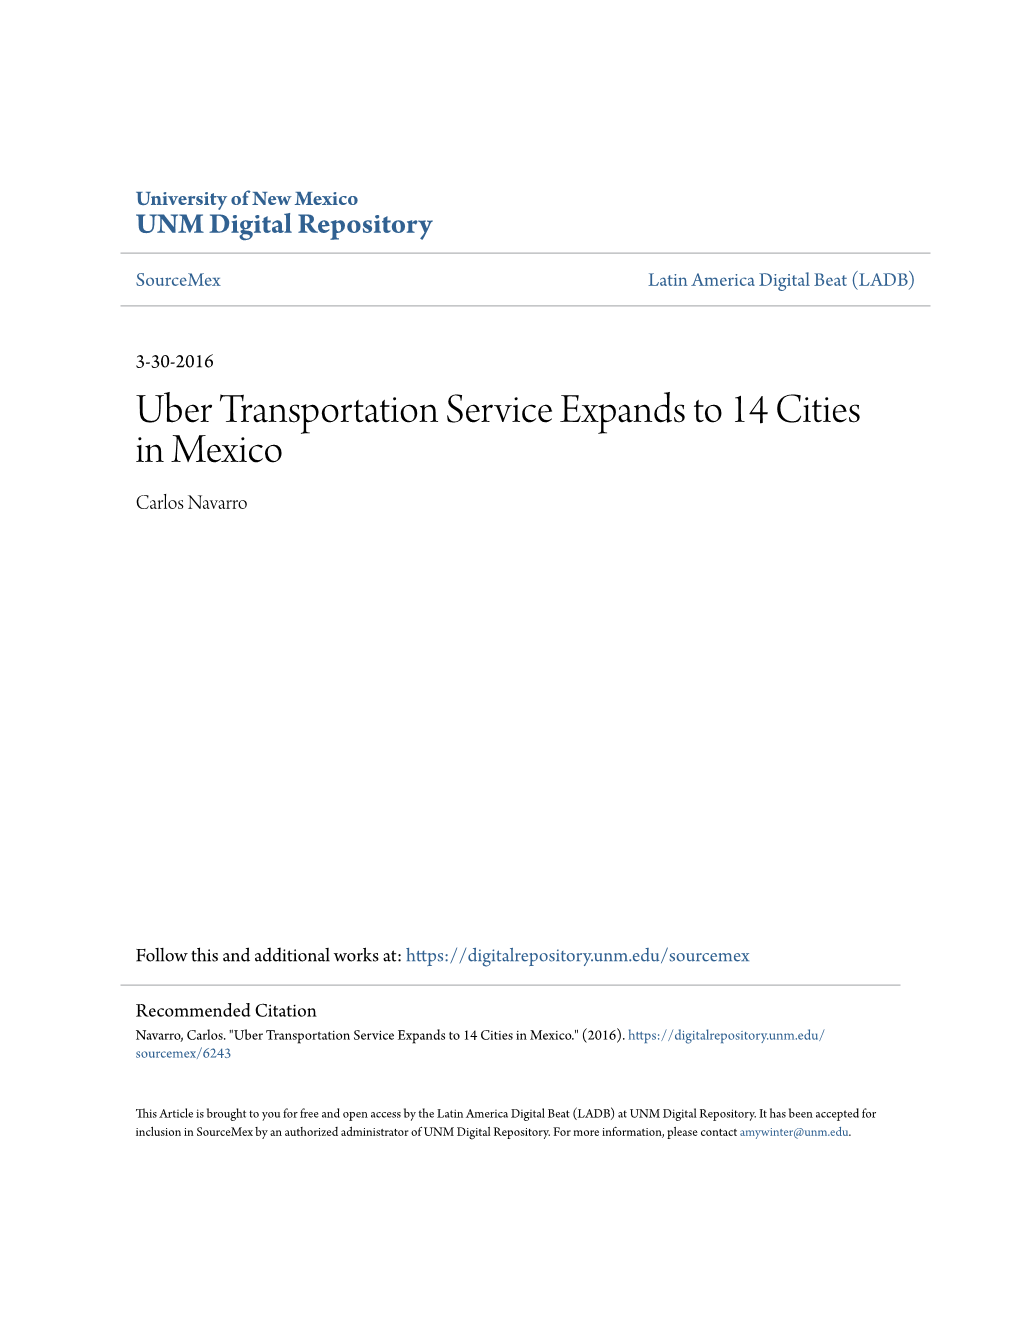 Uber Transportation Service Expands to 14 Cities in Mexico Carlos Navarro